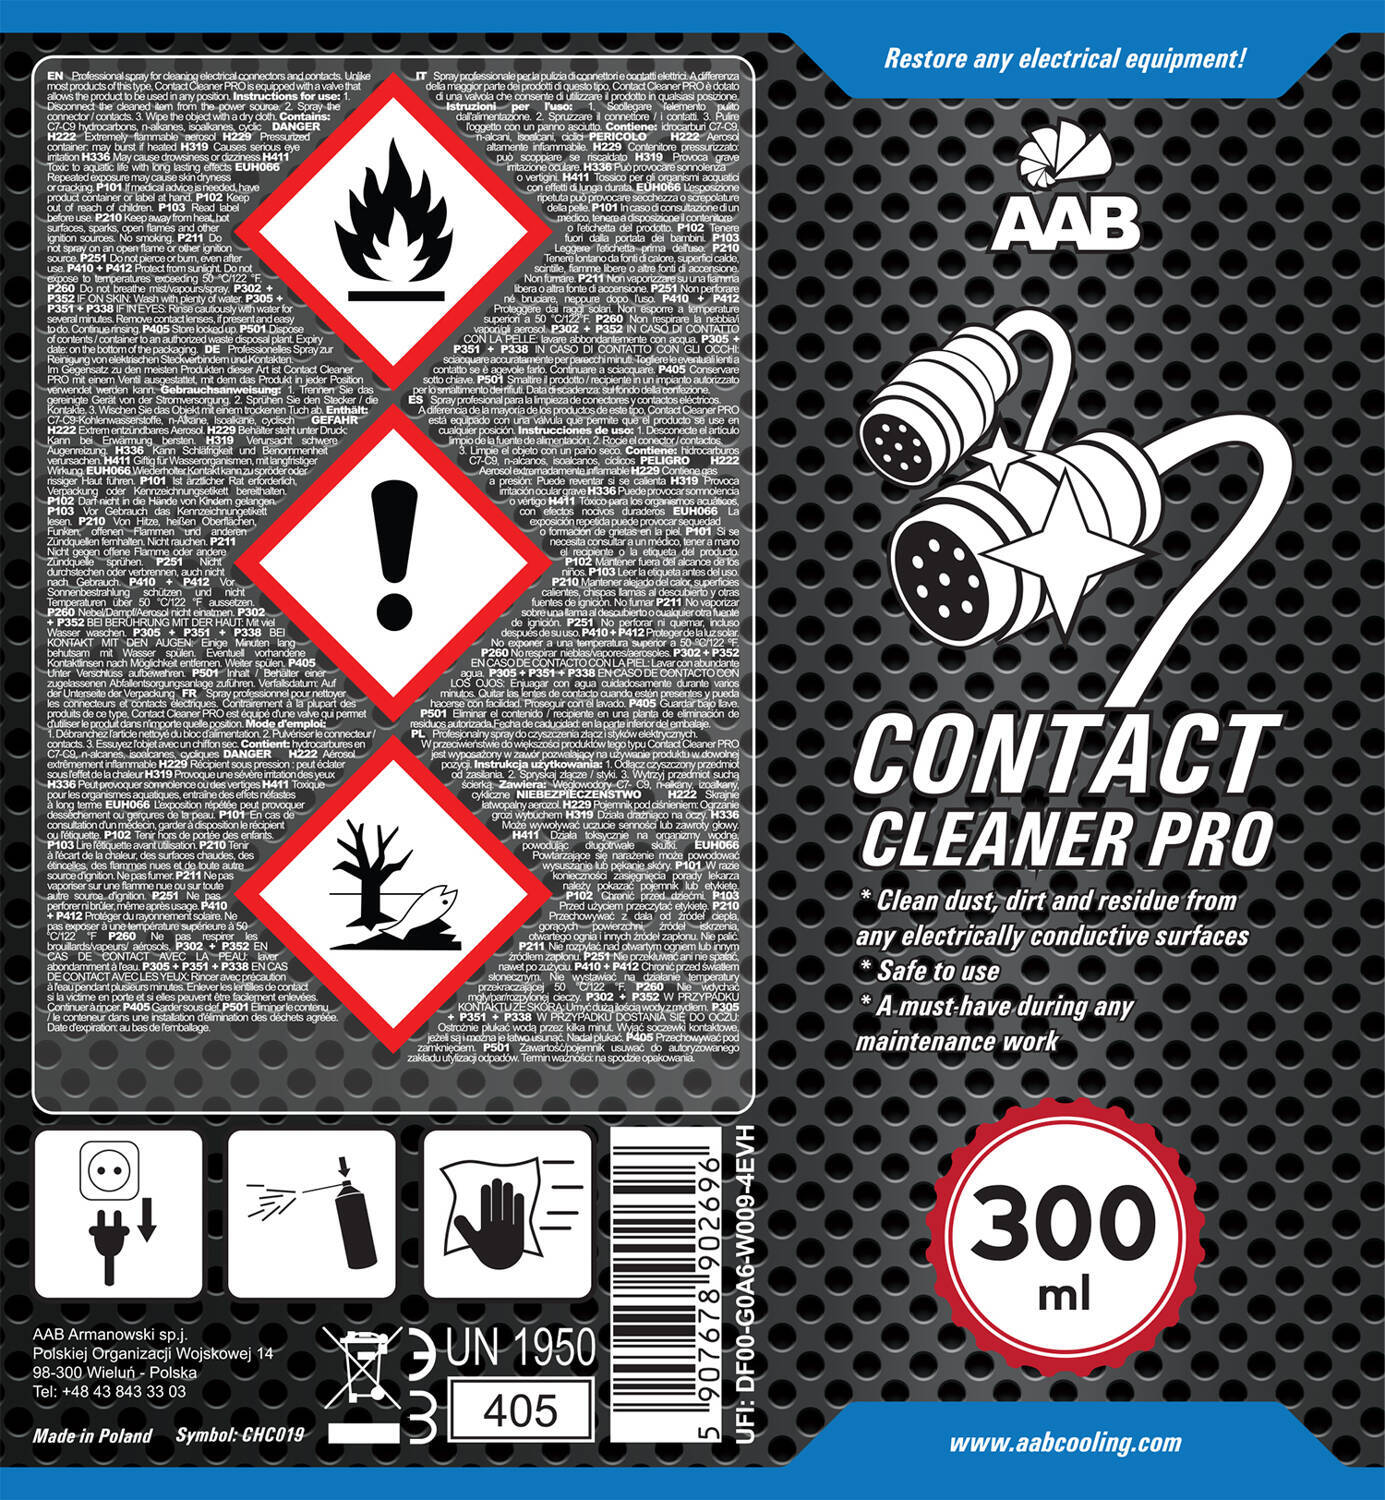 AAB Contact Cleaner PRO 300 ml